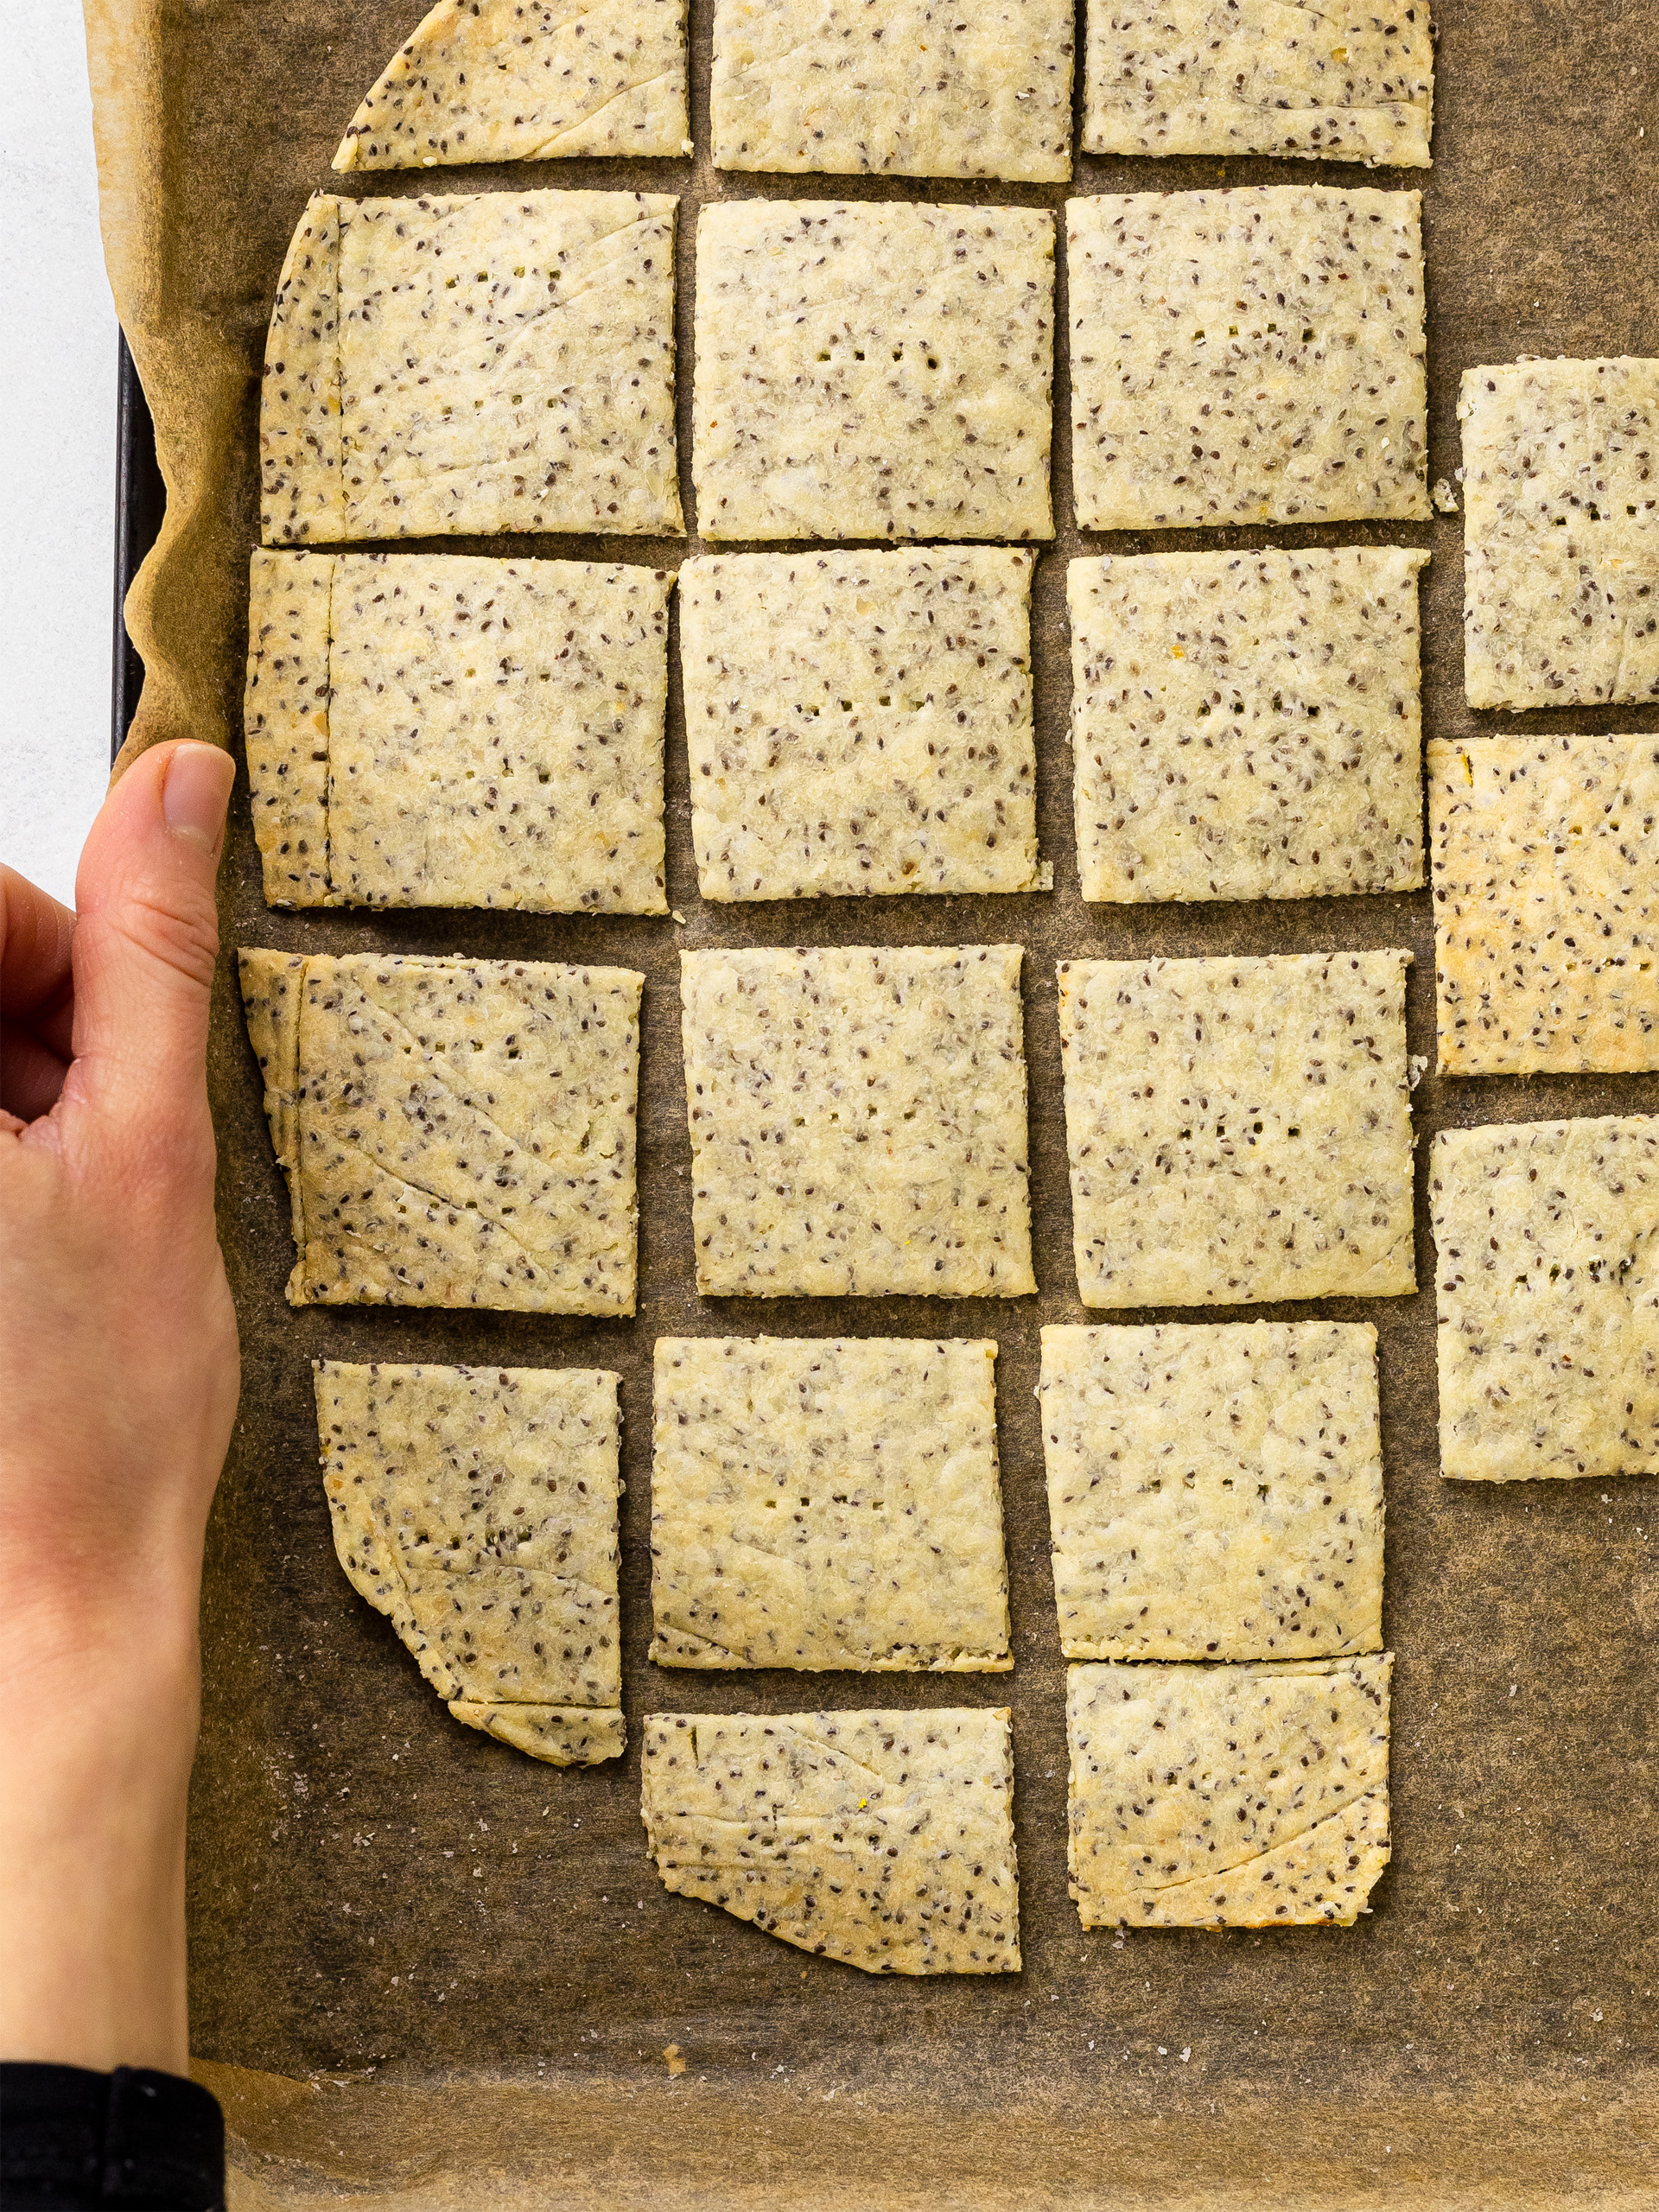 baked chia seed crackers on a tray